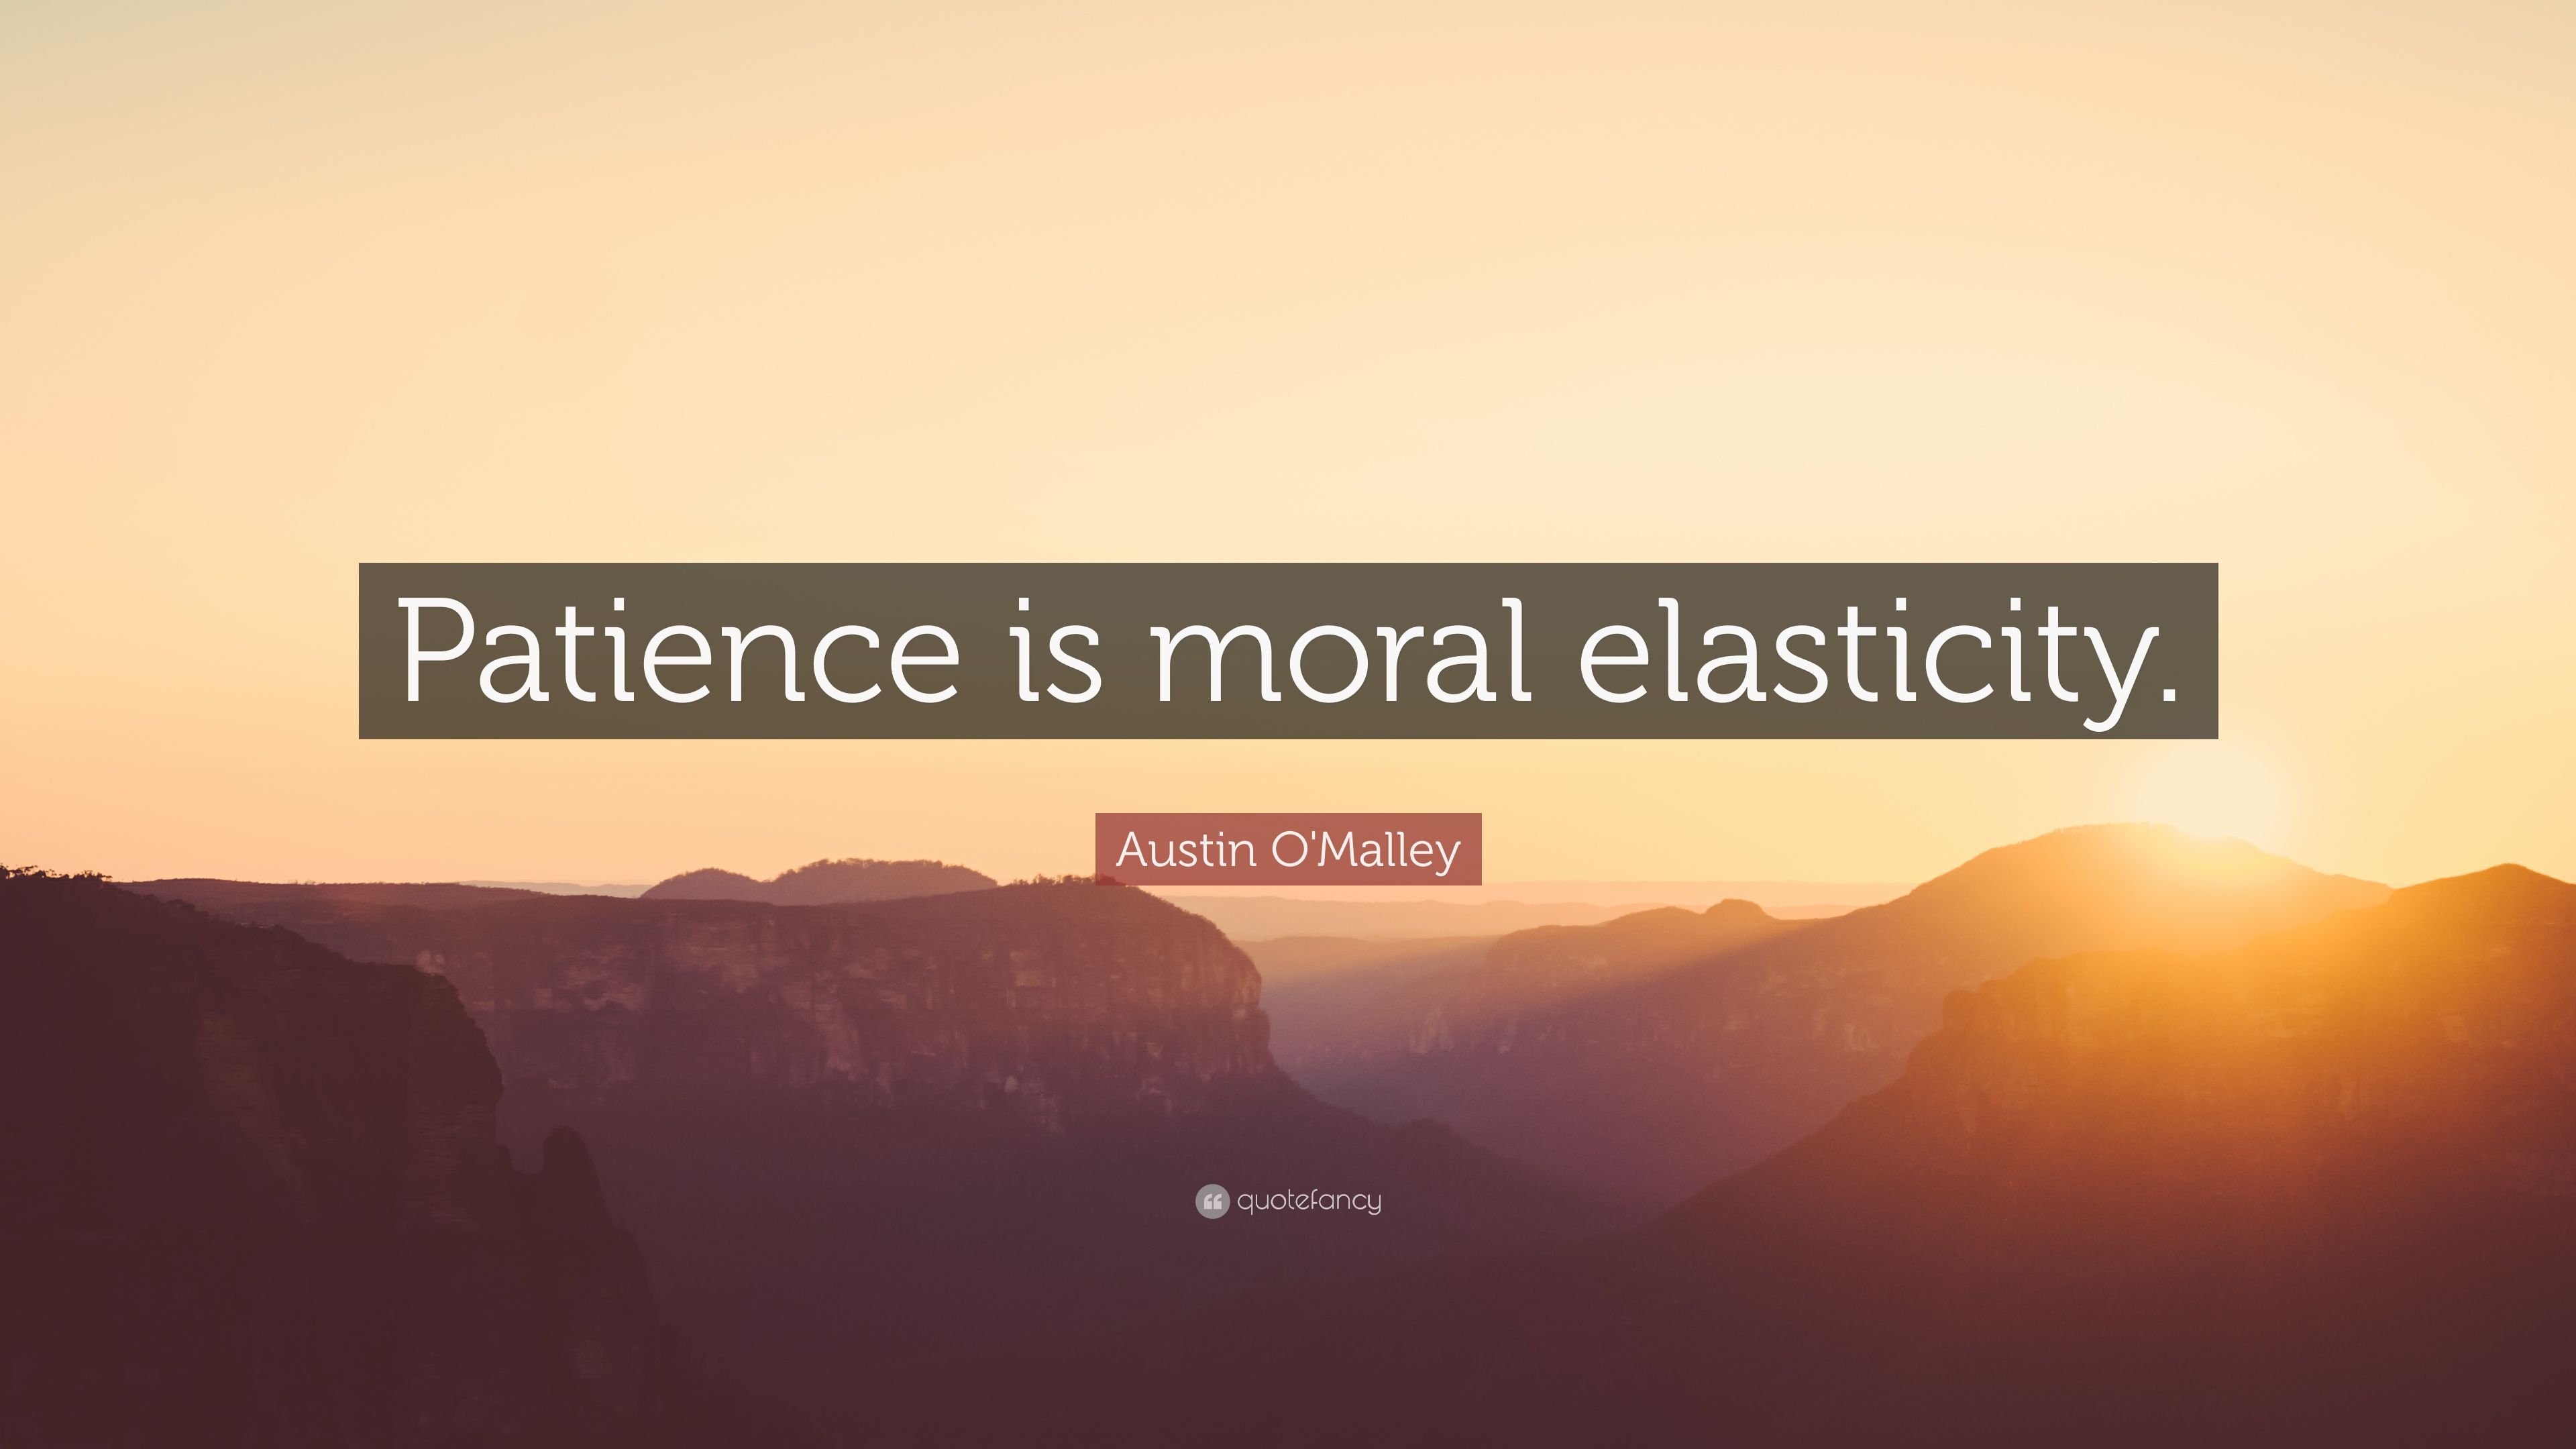 Austin O'Malley Quote: “Patience is moral elasticity.” 7